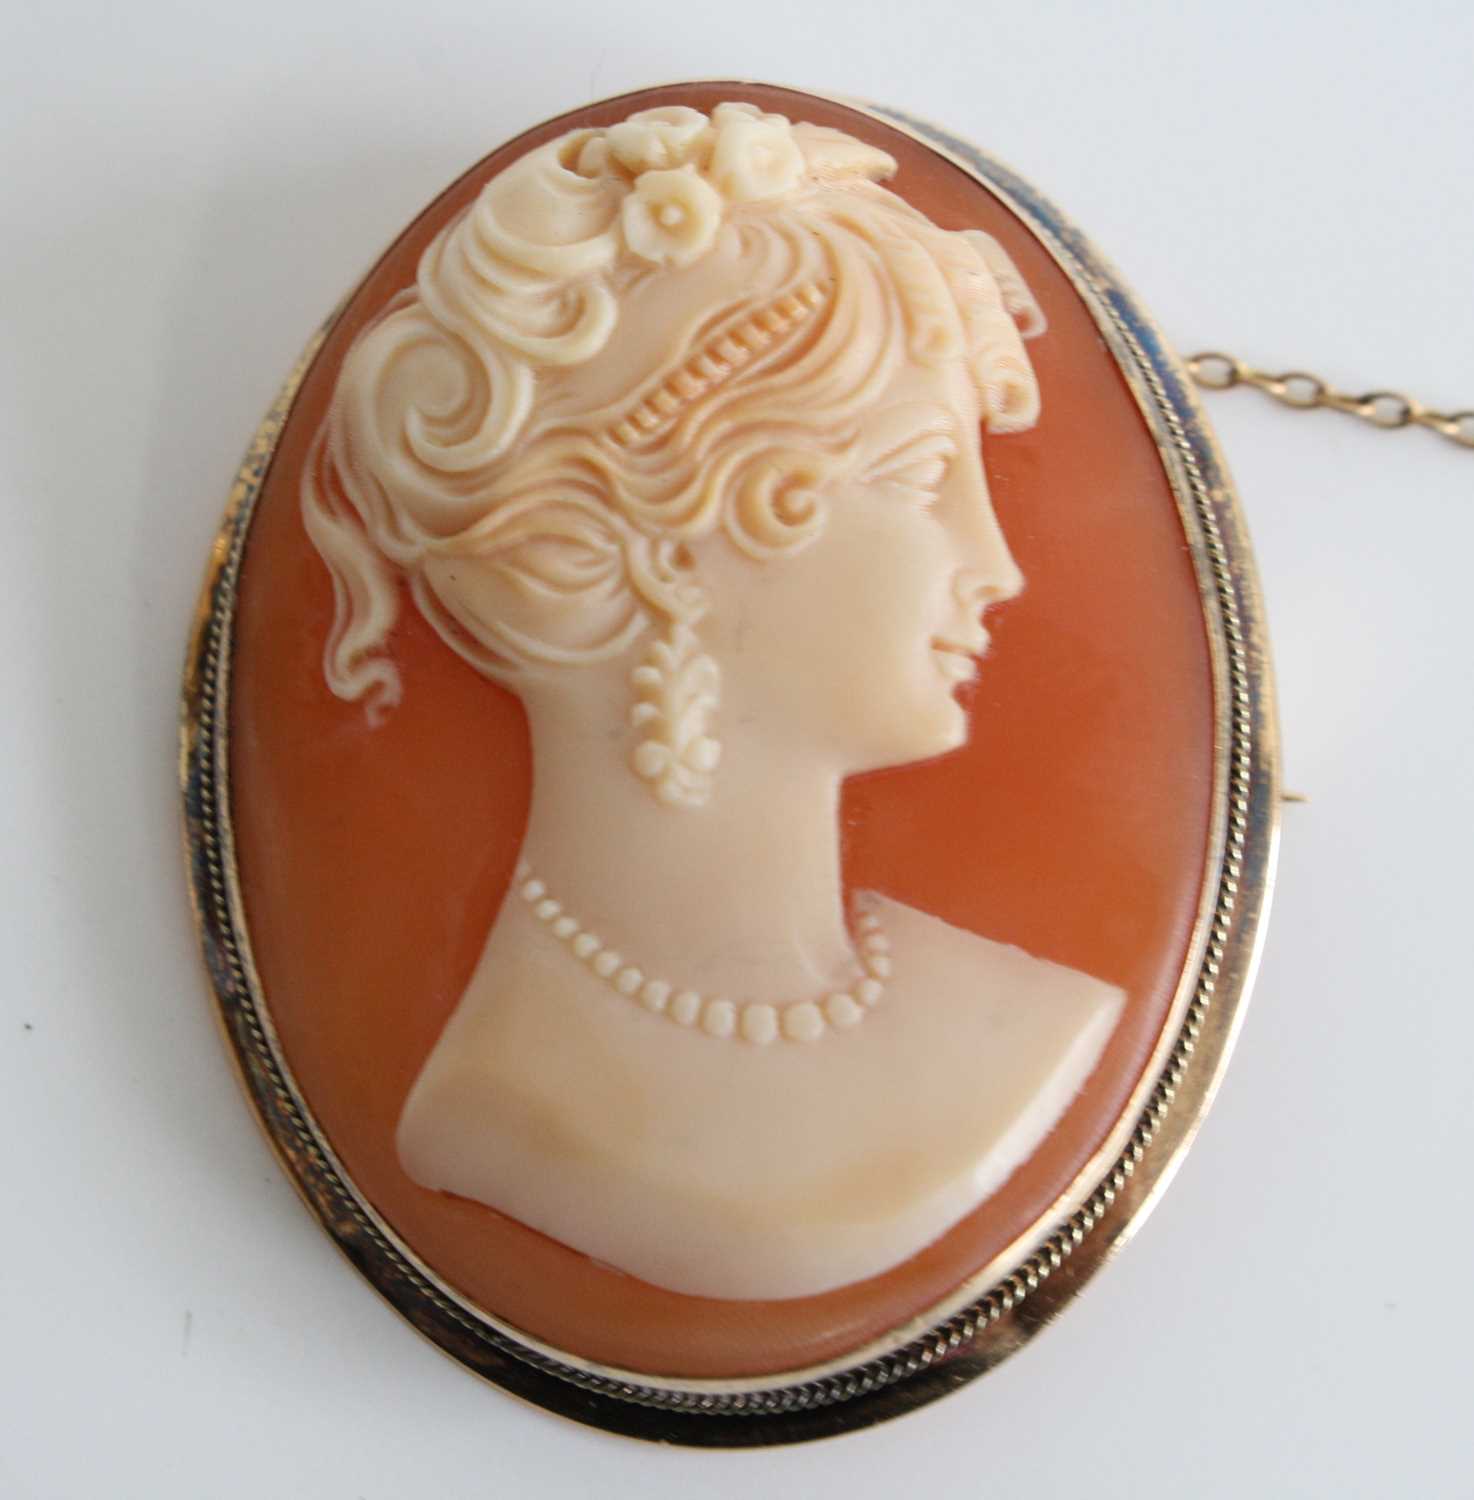 Two oval shell cameo brooches, one being 9ct yellow gold depicting Diana goddess of hunting - Image 6 of 9